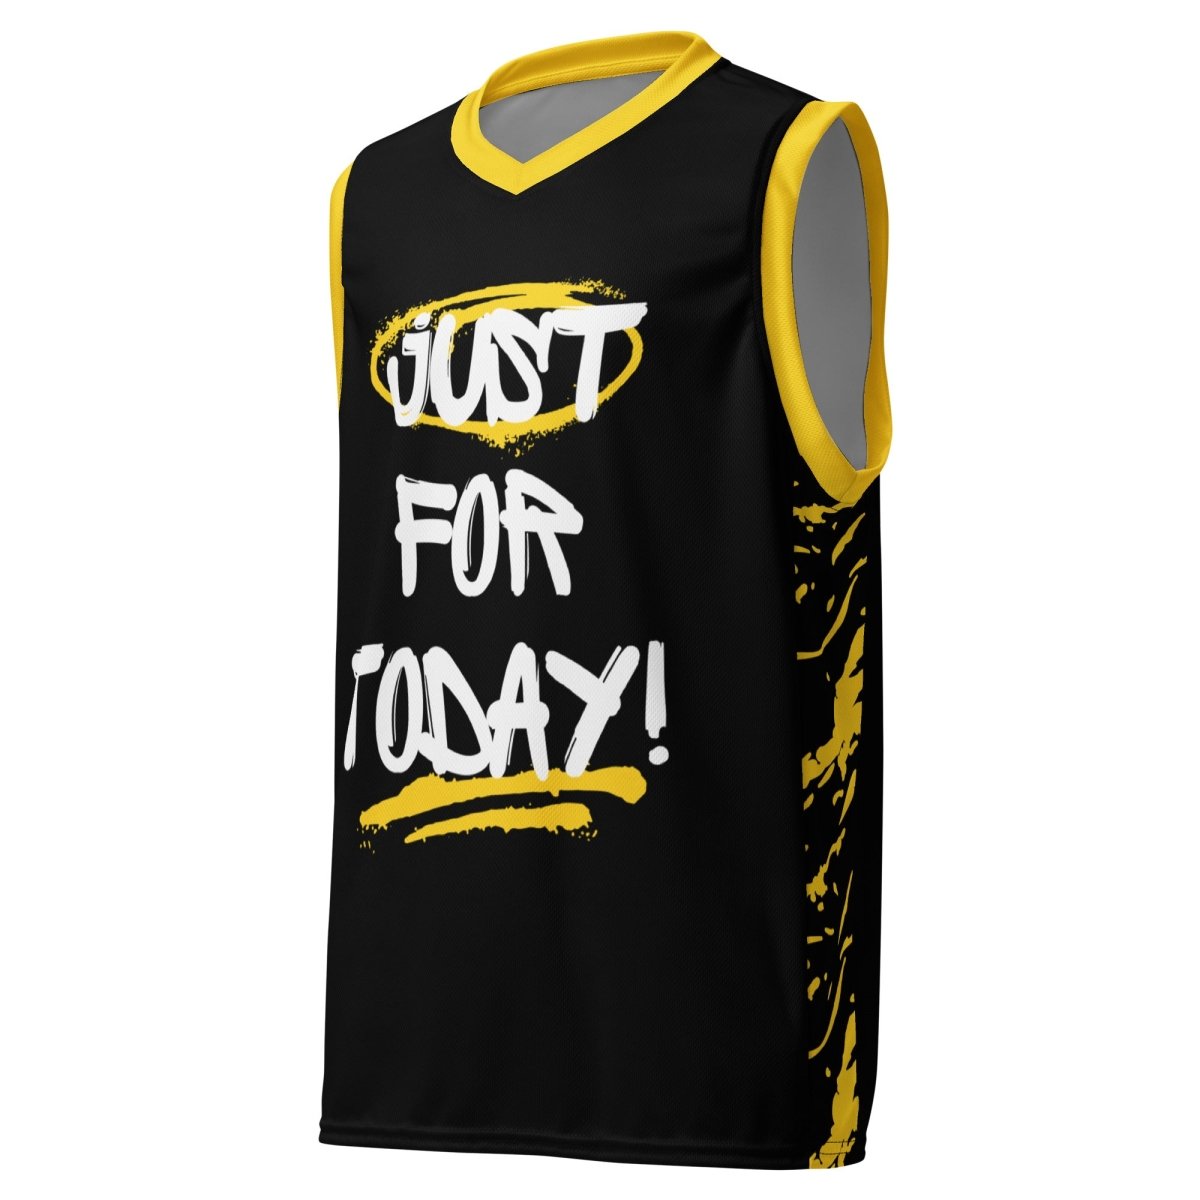 Just For Today Recycled Unisex Basketball Jersey - 2XS | Sobervation